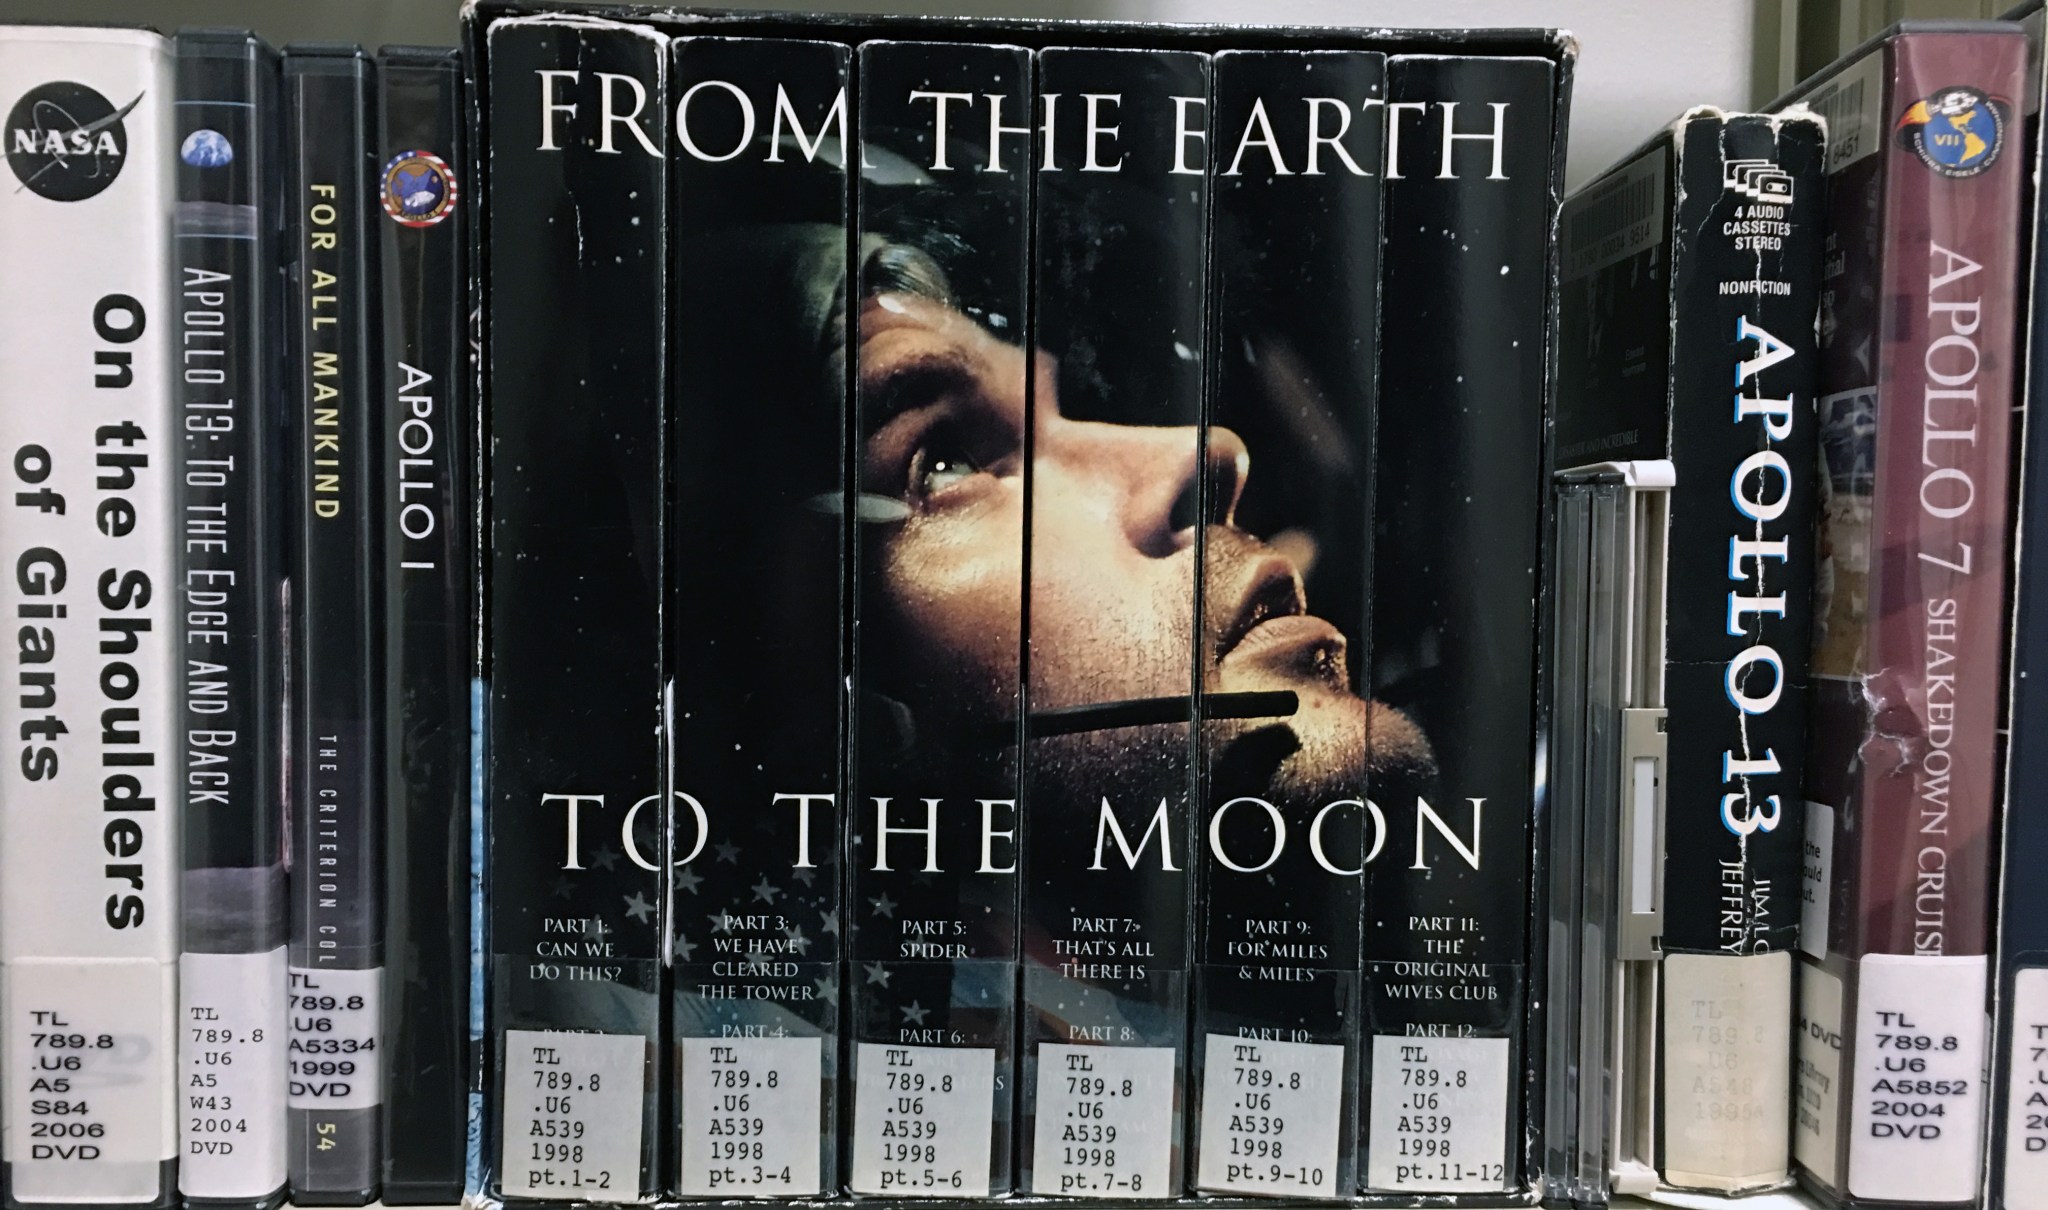 From the Earth to the Moon series